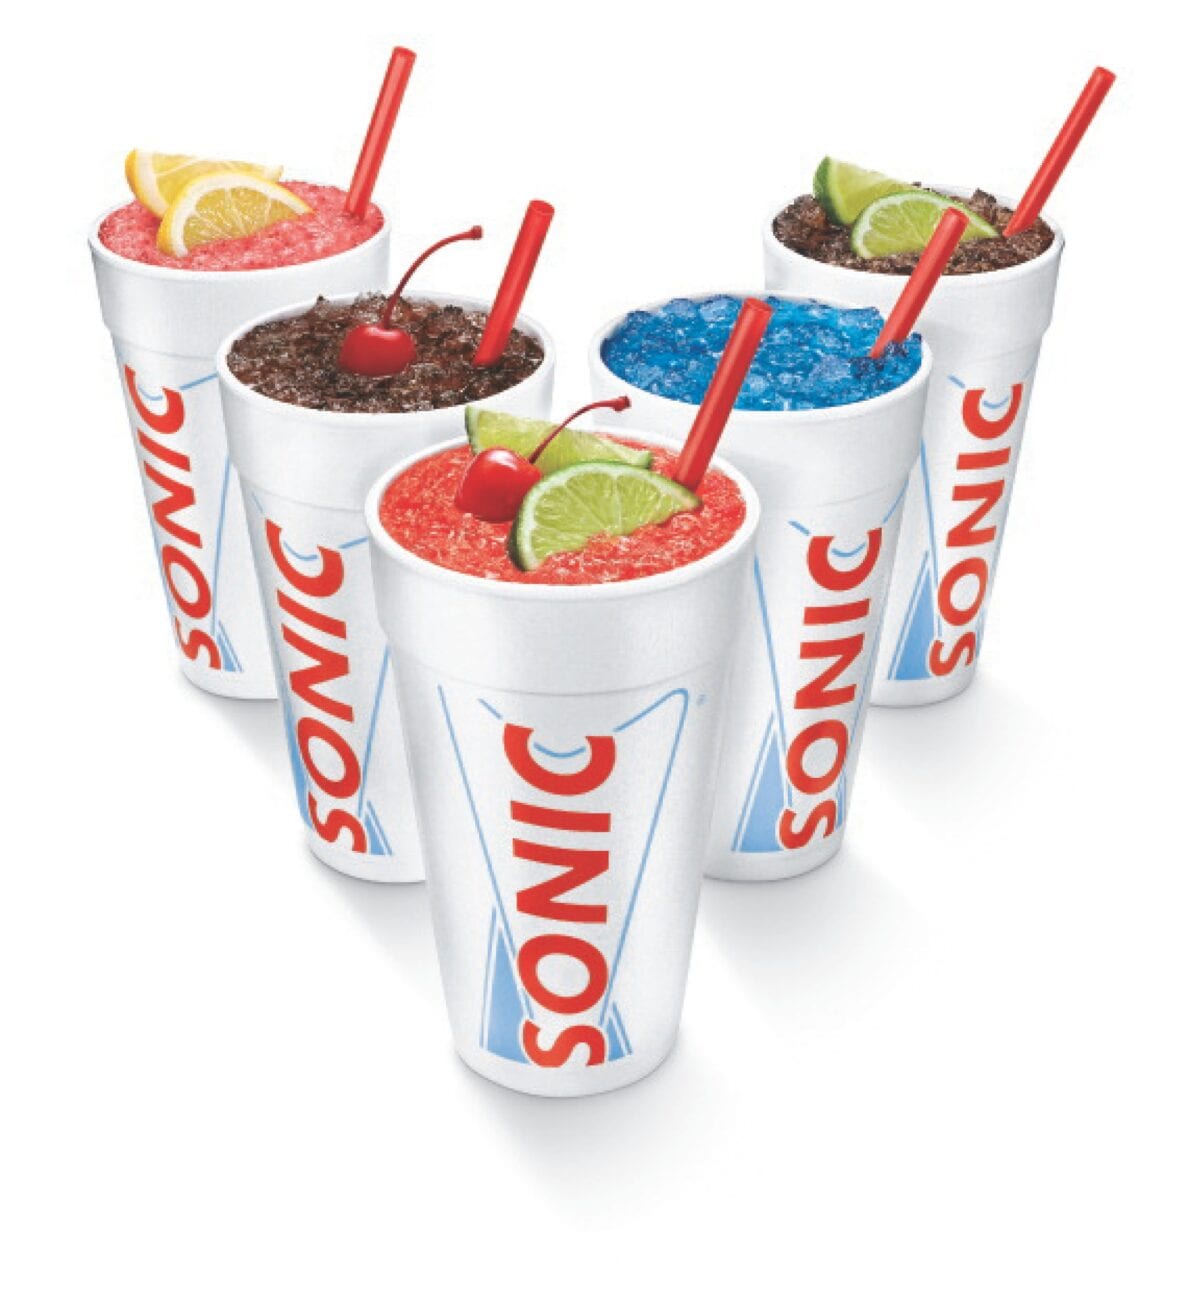 Sonic Is Releasing A Red, White & Blue Slush Float Complete with A